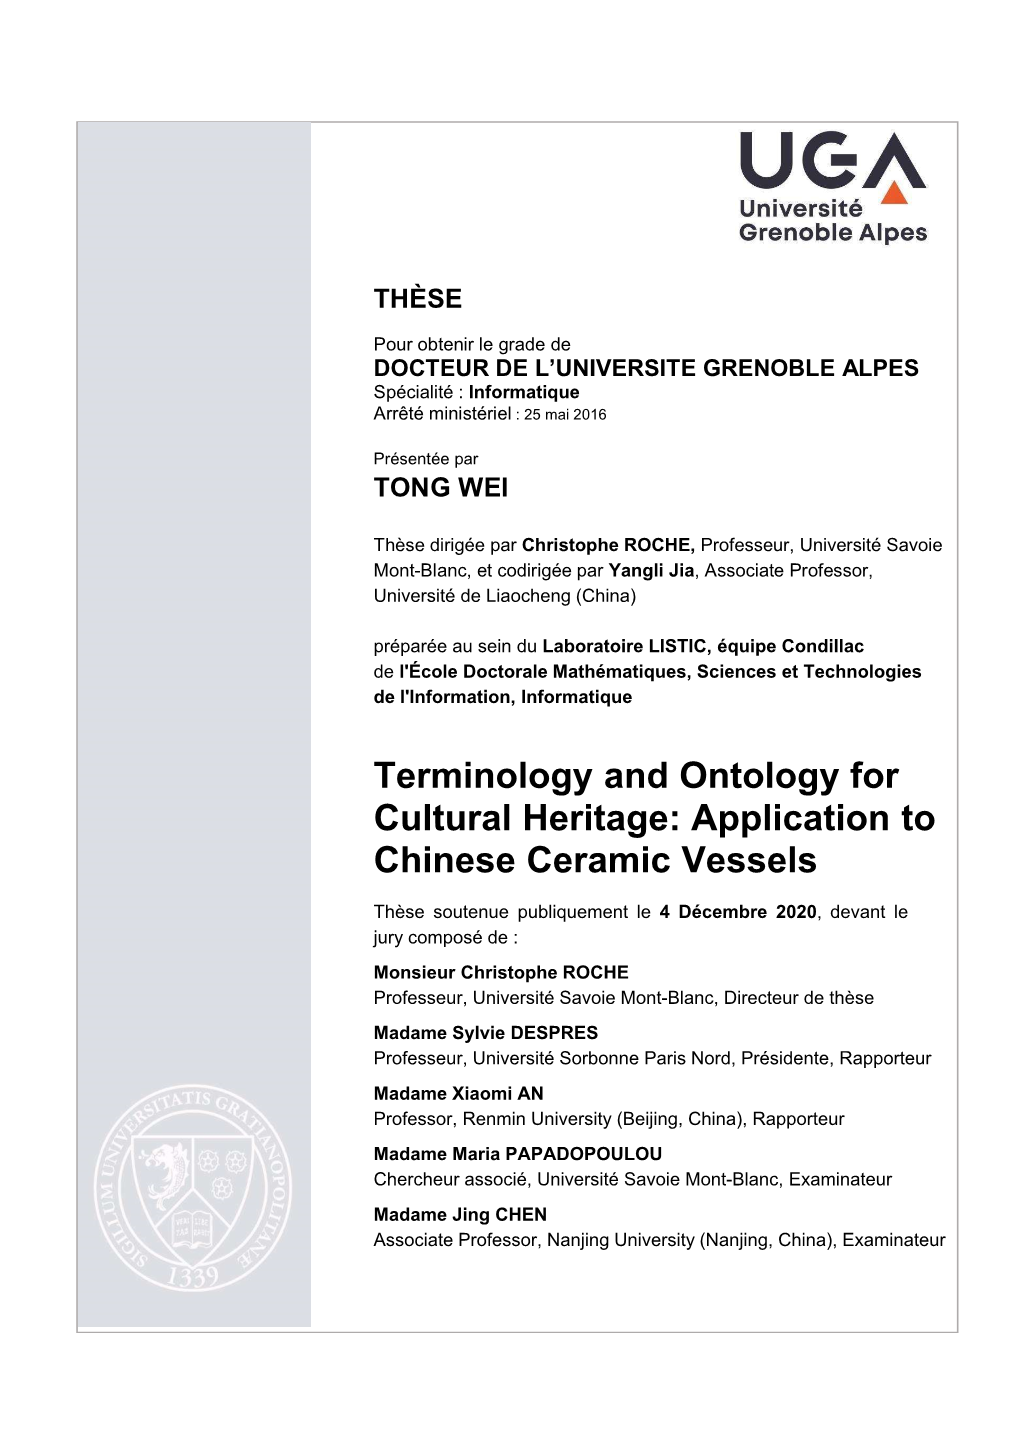 Terminology and Ontology for Cultural Heritage: Application to Chinese Ceramic Vessels